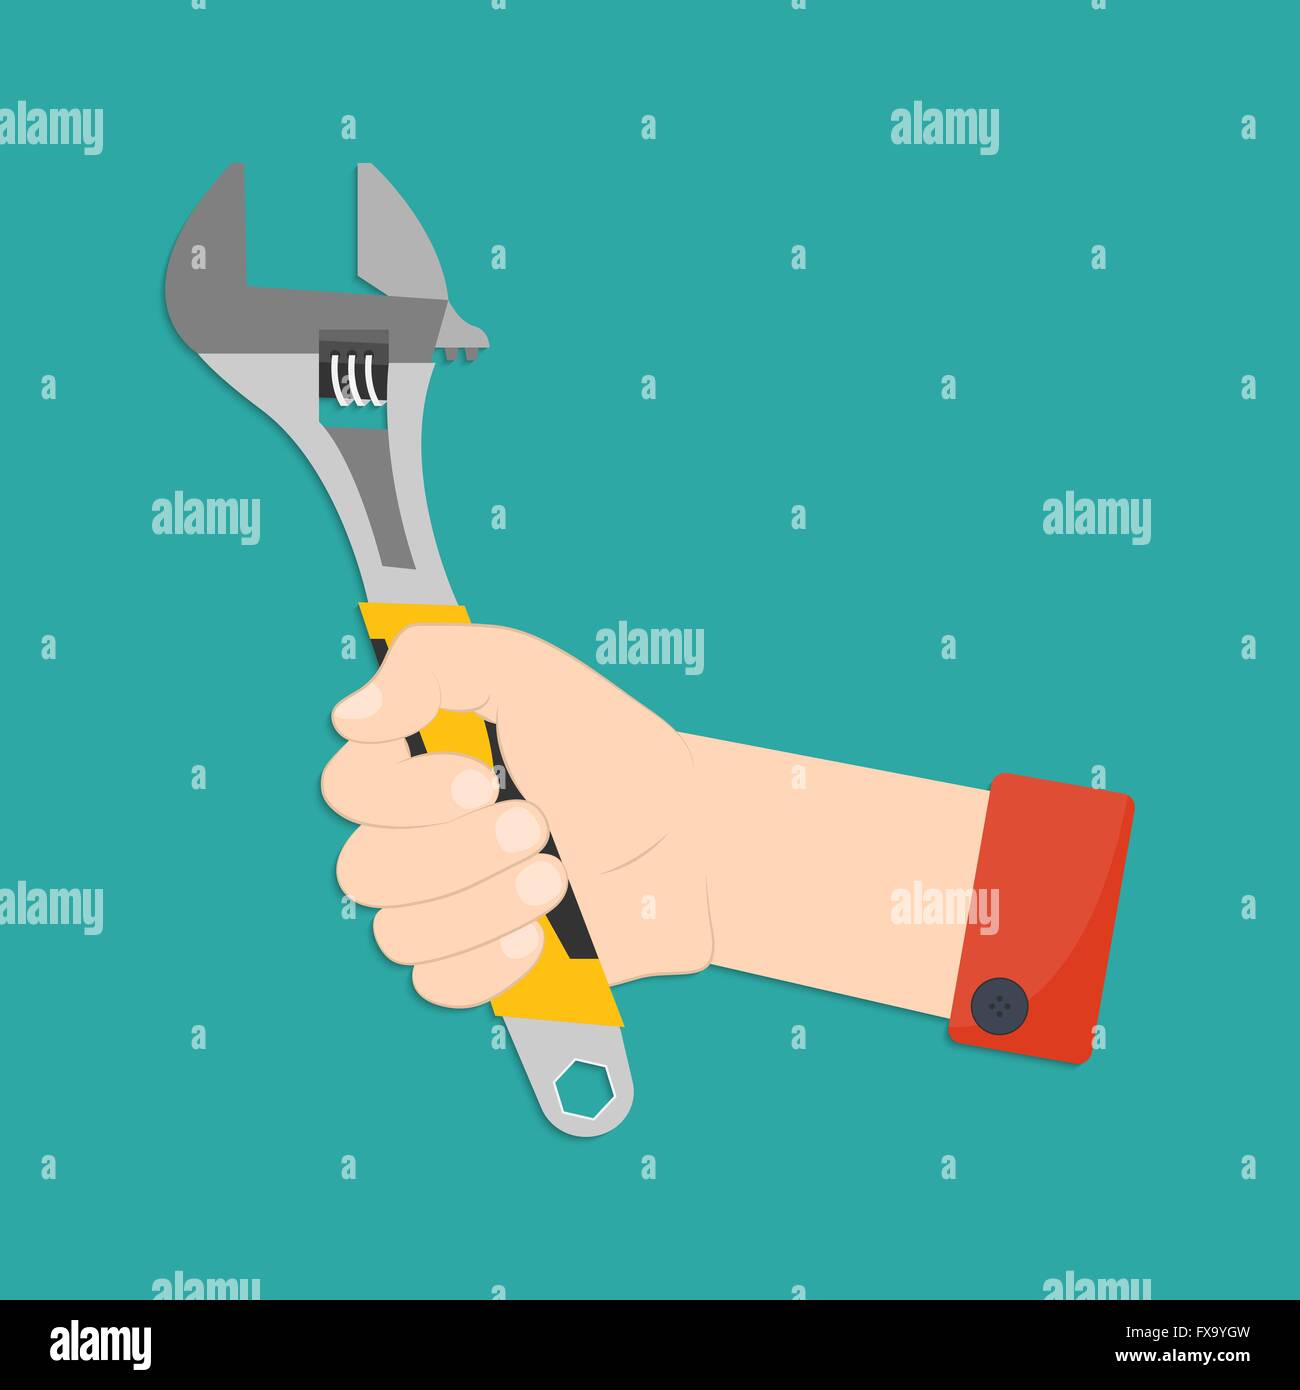 Vector illustration of hand with monkey wrench. Man's hand with monkey wrench in flat style for your design Stock Vector